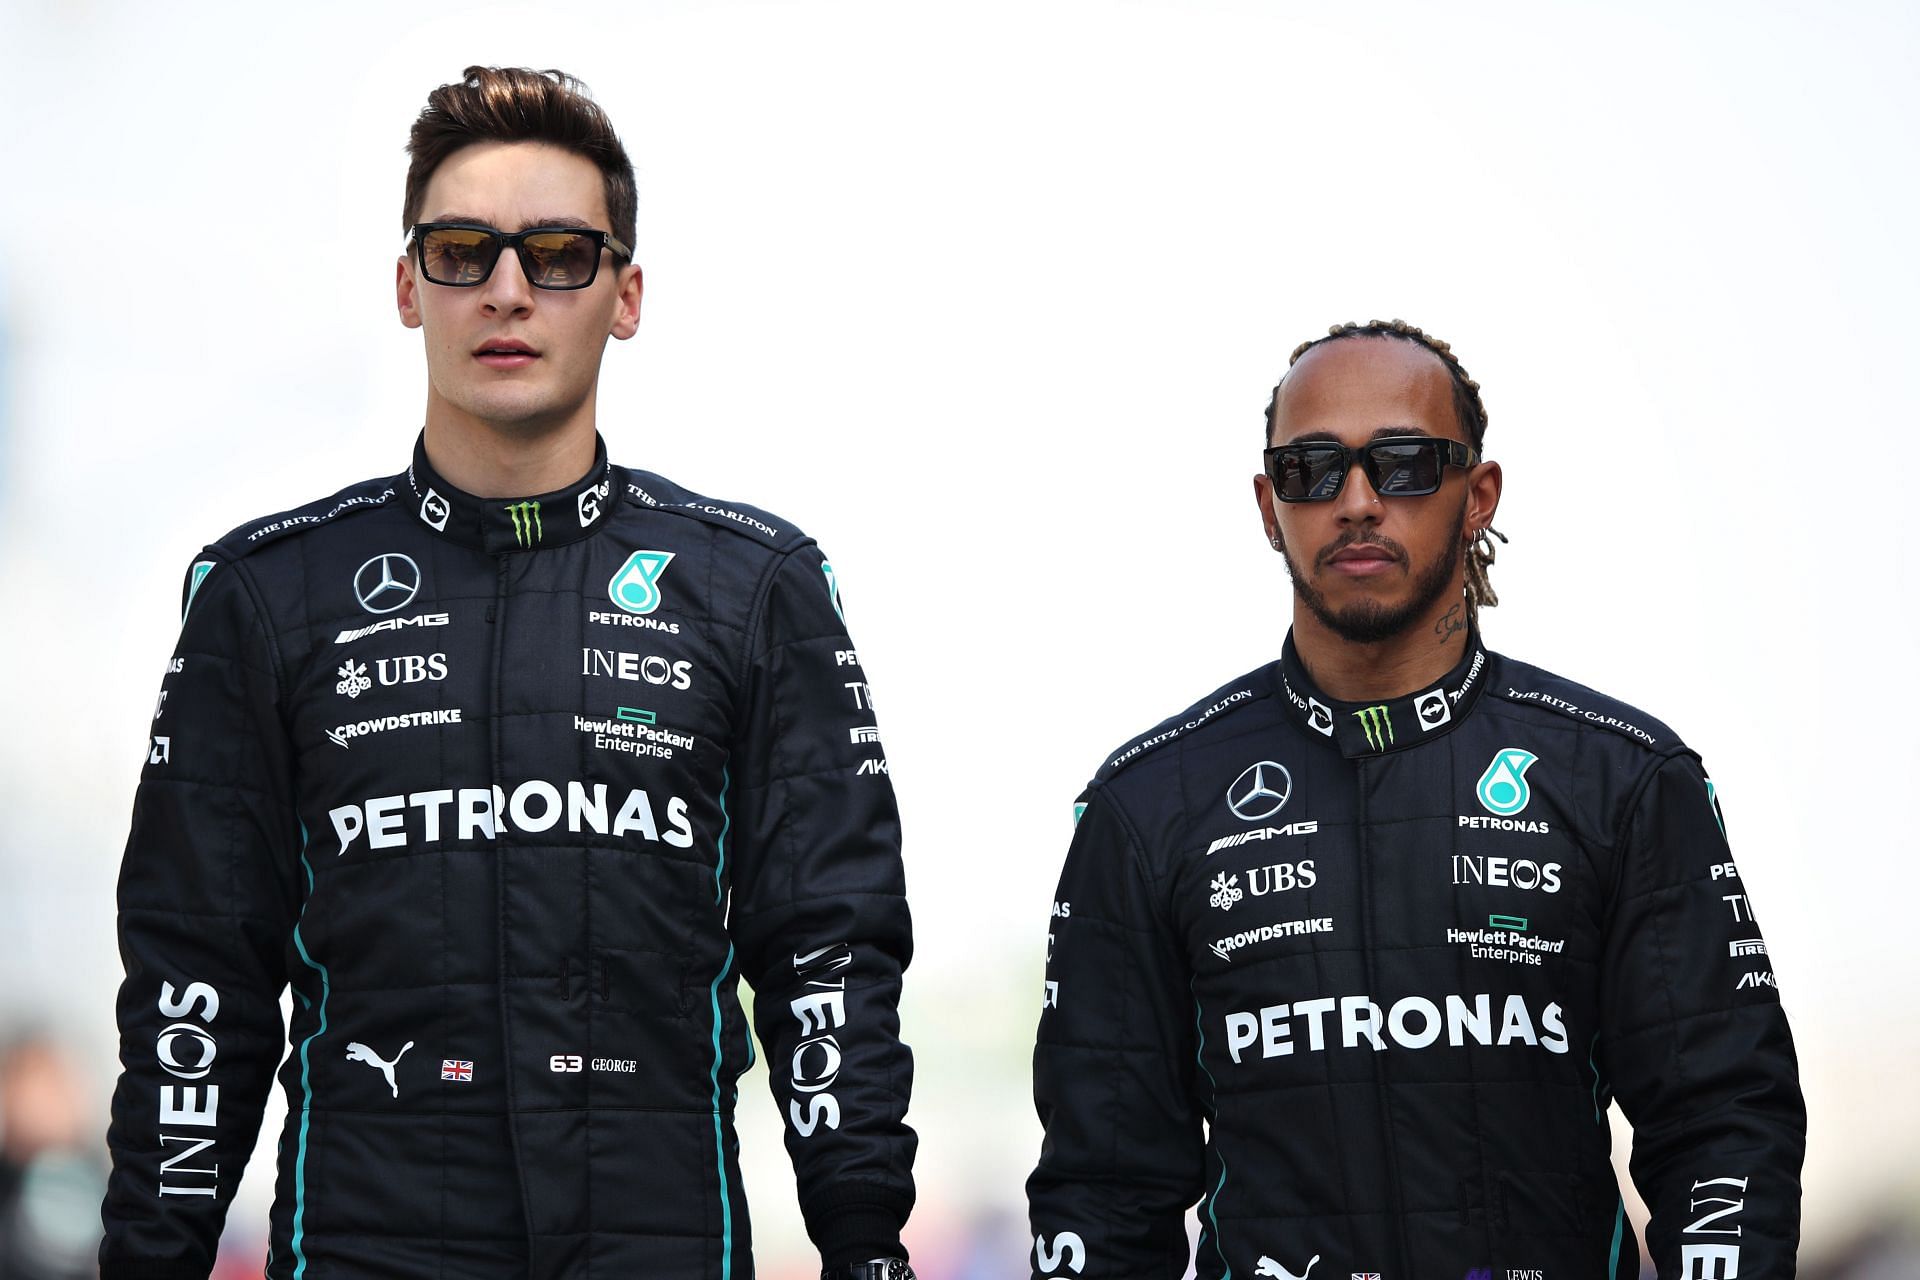 Mercedes drivers George Russell and Lewis Hamilton at the Formula 1 Testing in Bahrain - Day 1